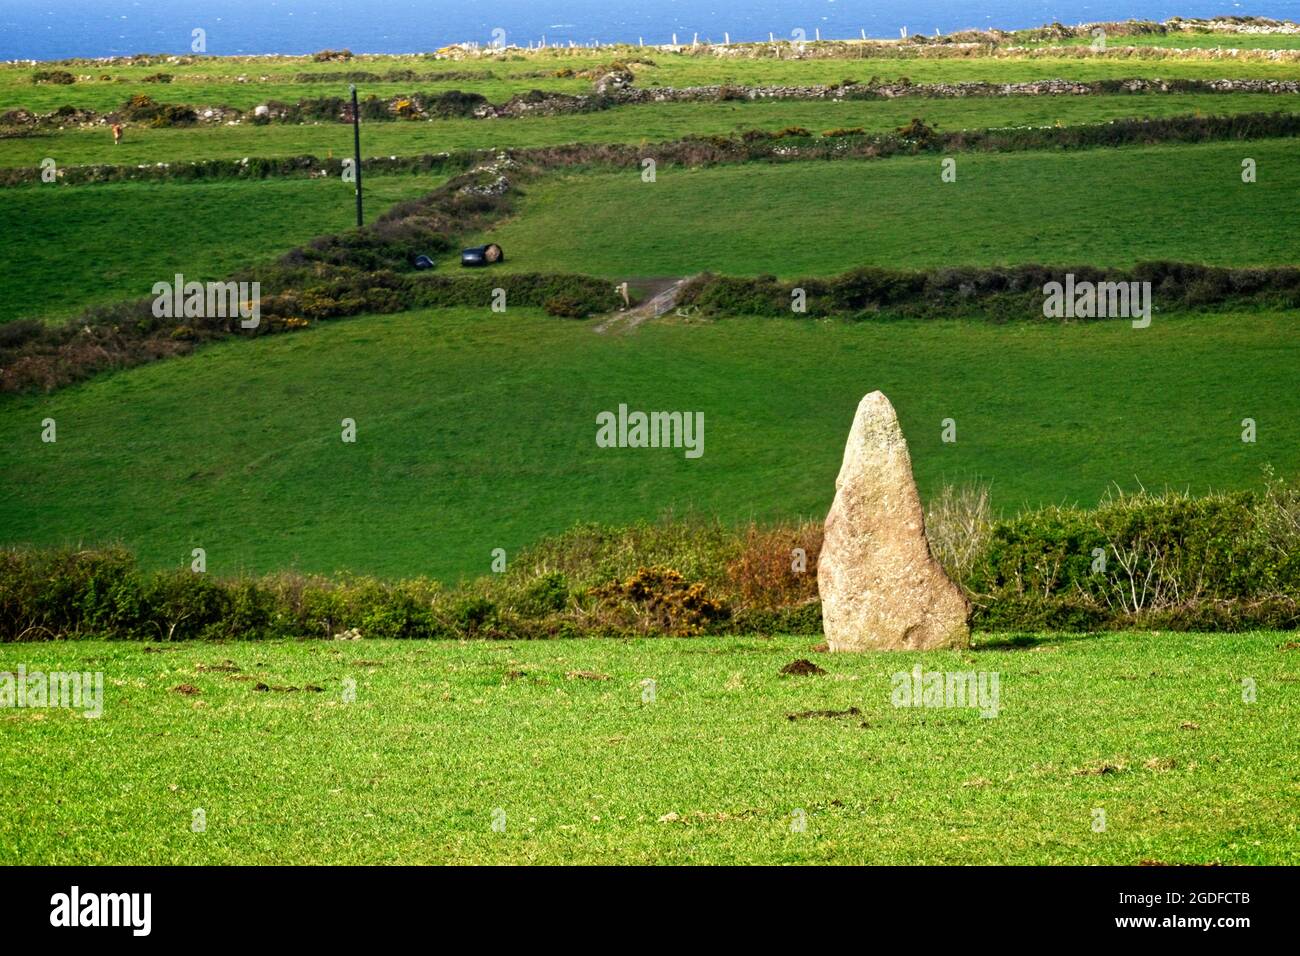 Standing stone in a pasture field, Nanquidno, Cornwall, England, UK. Stock Photo